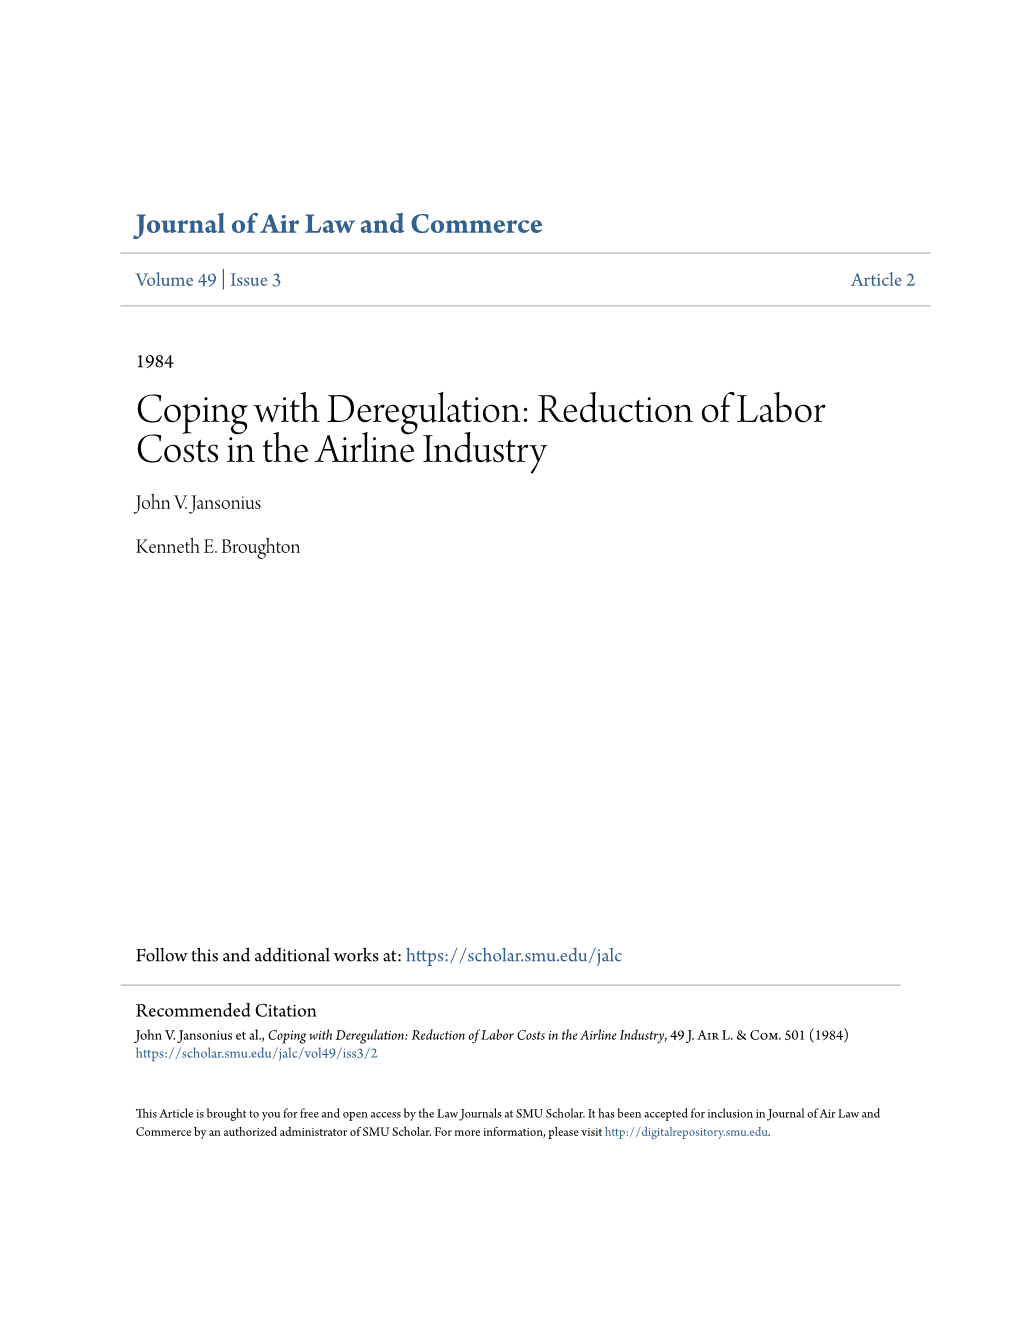 Reduction of Labor Costs in the Airline Industry John V